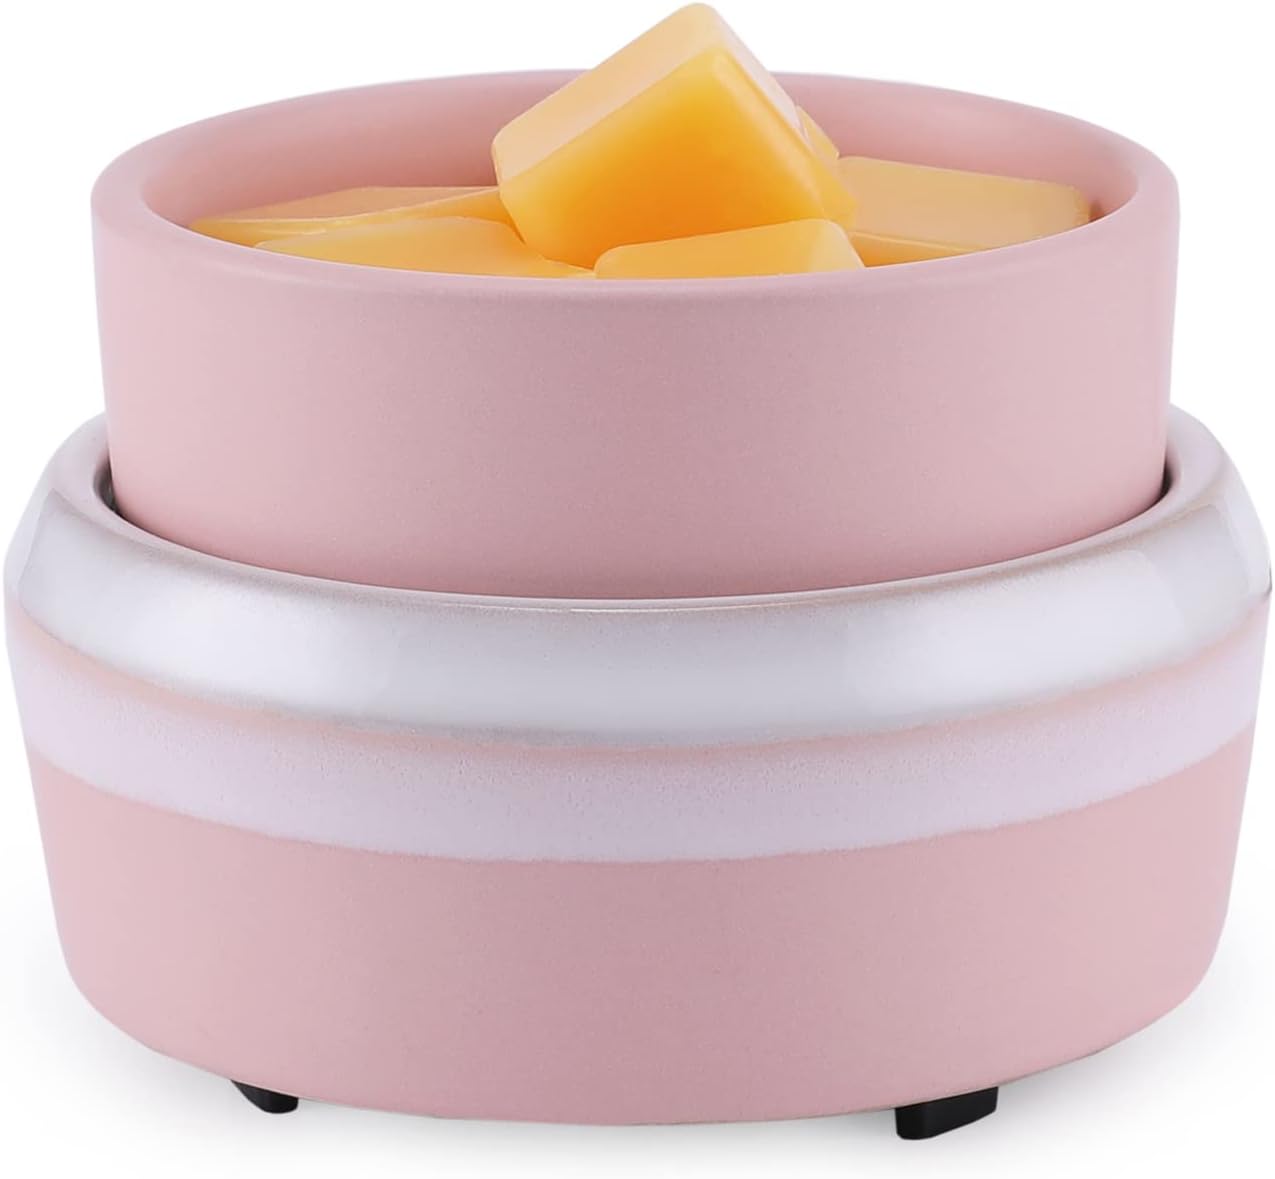 Wax Warmers Accessories WholeSale - Price List, Bulk Buy at